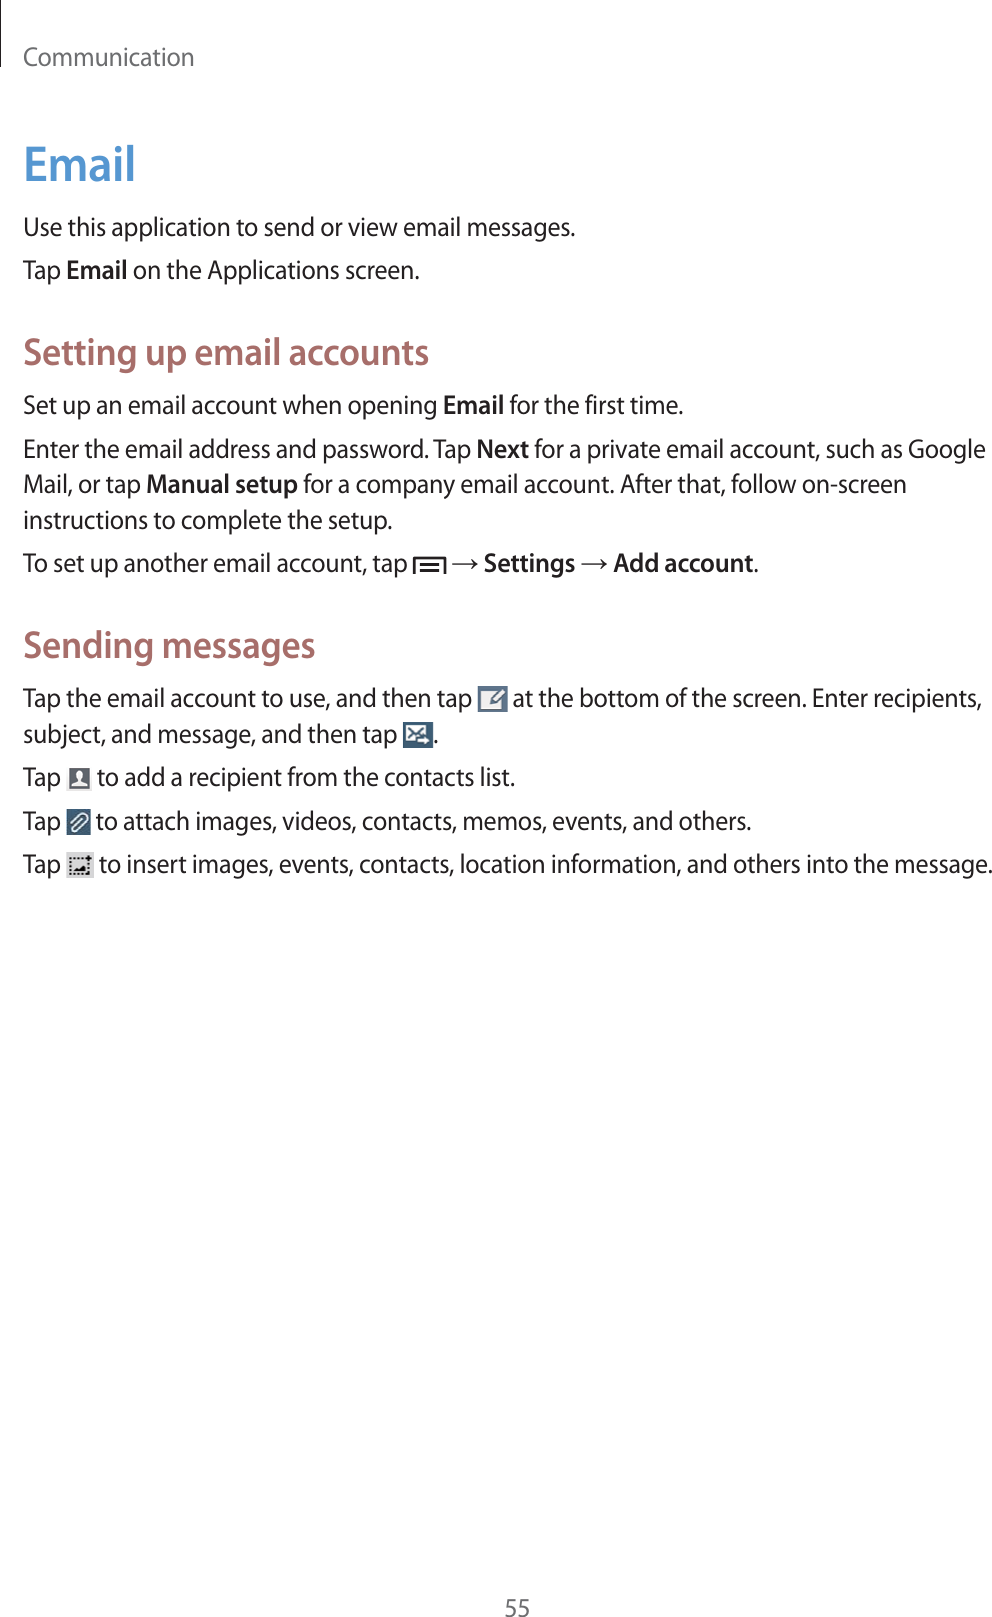 Communication55EmailUse this application to send or view email messages.Tap Email on the Applications screen.Setting up email accountsSet up an email account when opening Email for the first time.Enter the email address and password. Tap Next for a private email account, such as Google Mail, or tap Manual setup for a company email account. After that, follow on-screen instructions to complete the setup.To set up another email account, tap    Settings  Add account.Sending messagesTap the email account to use, and then tap   at the bottom of the screen. Enter recipients, subject, and message, and then tap  .Tap   to add a recipient from the contacts list.Tap   to attach images, videos, contacts, memos, events, and others.Tap   to insert images, events, contacts, location information, and others into the message.